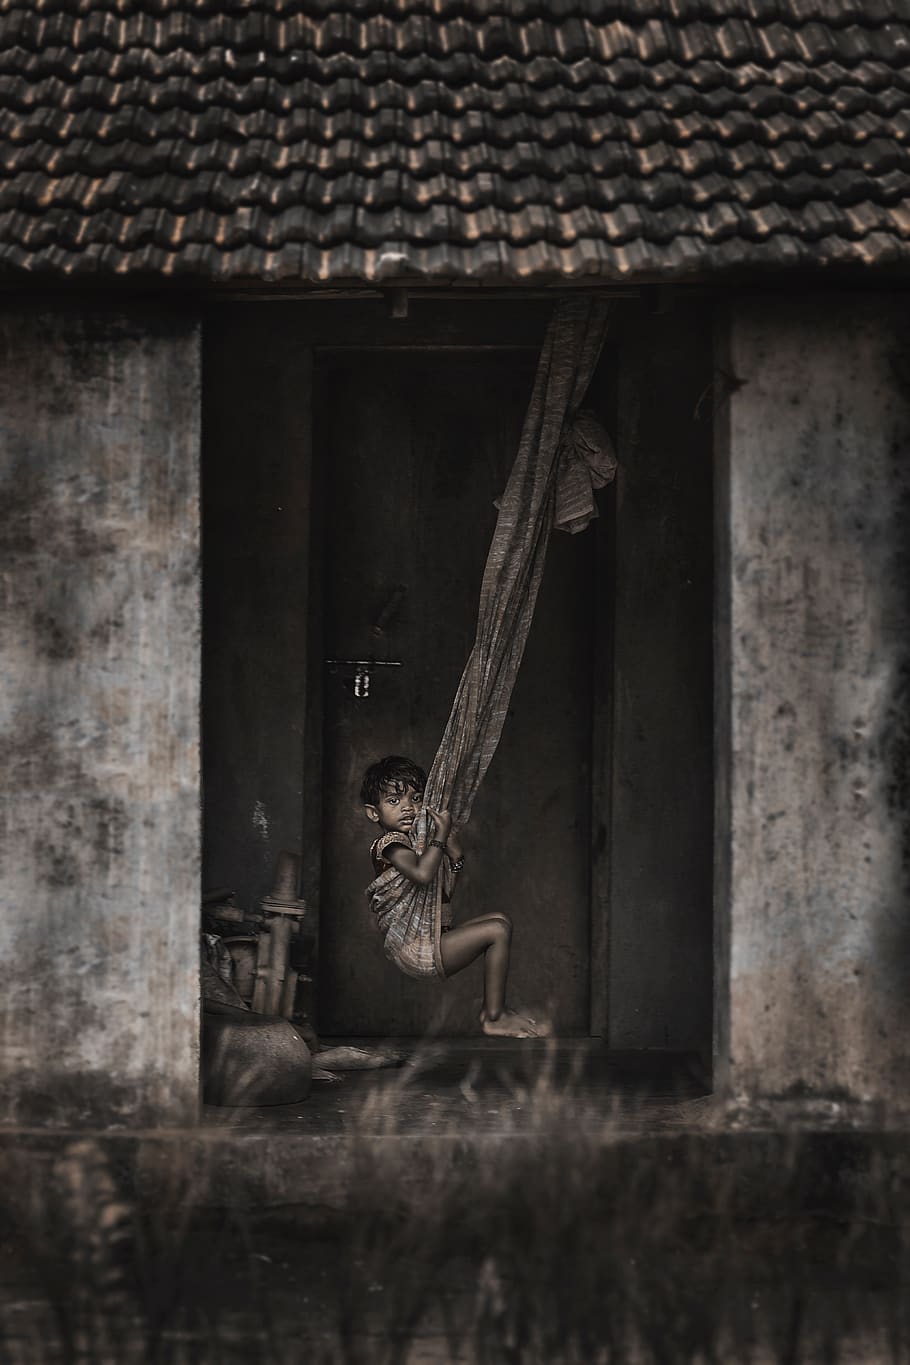 people, kid, child, poverty, poor, hammock, house, home, architecture, built structure